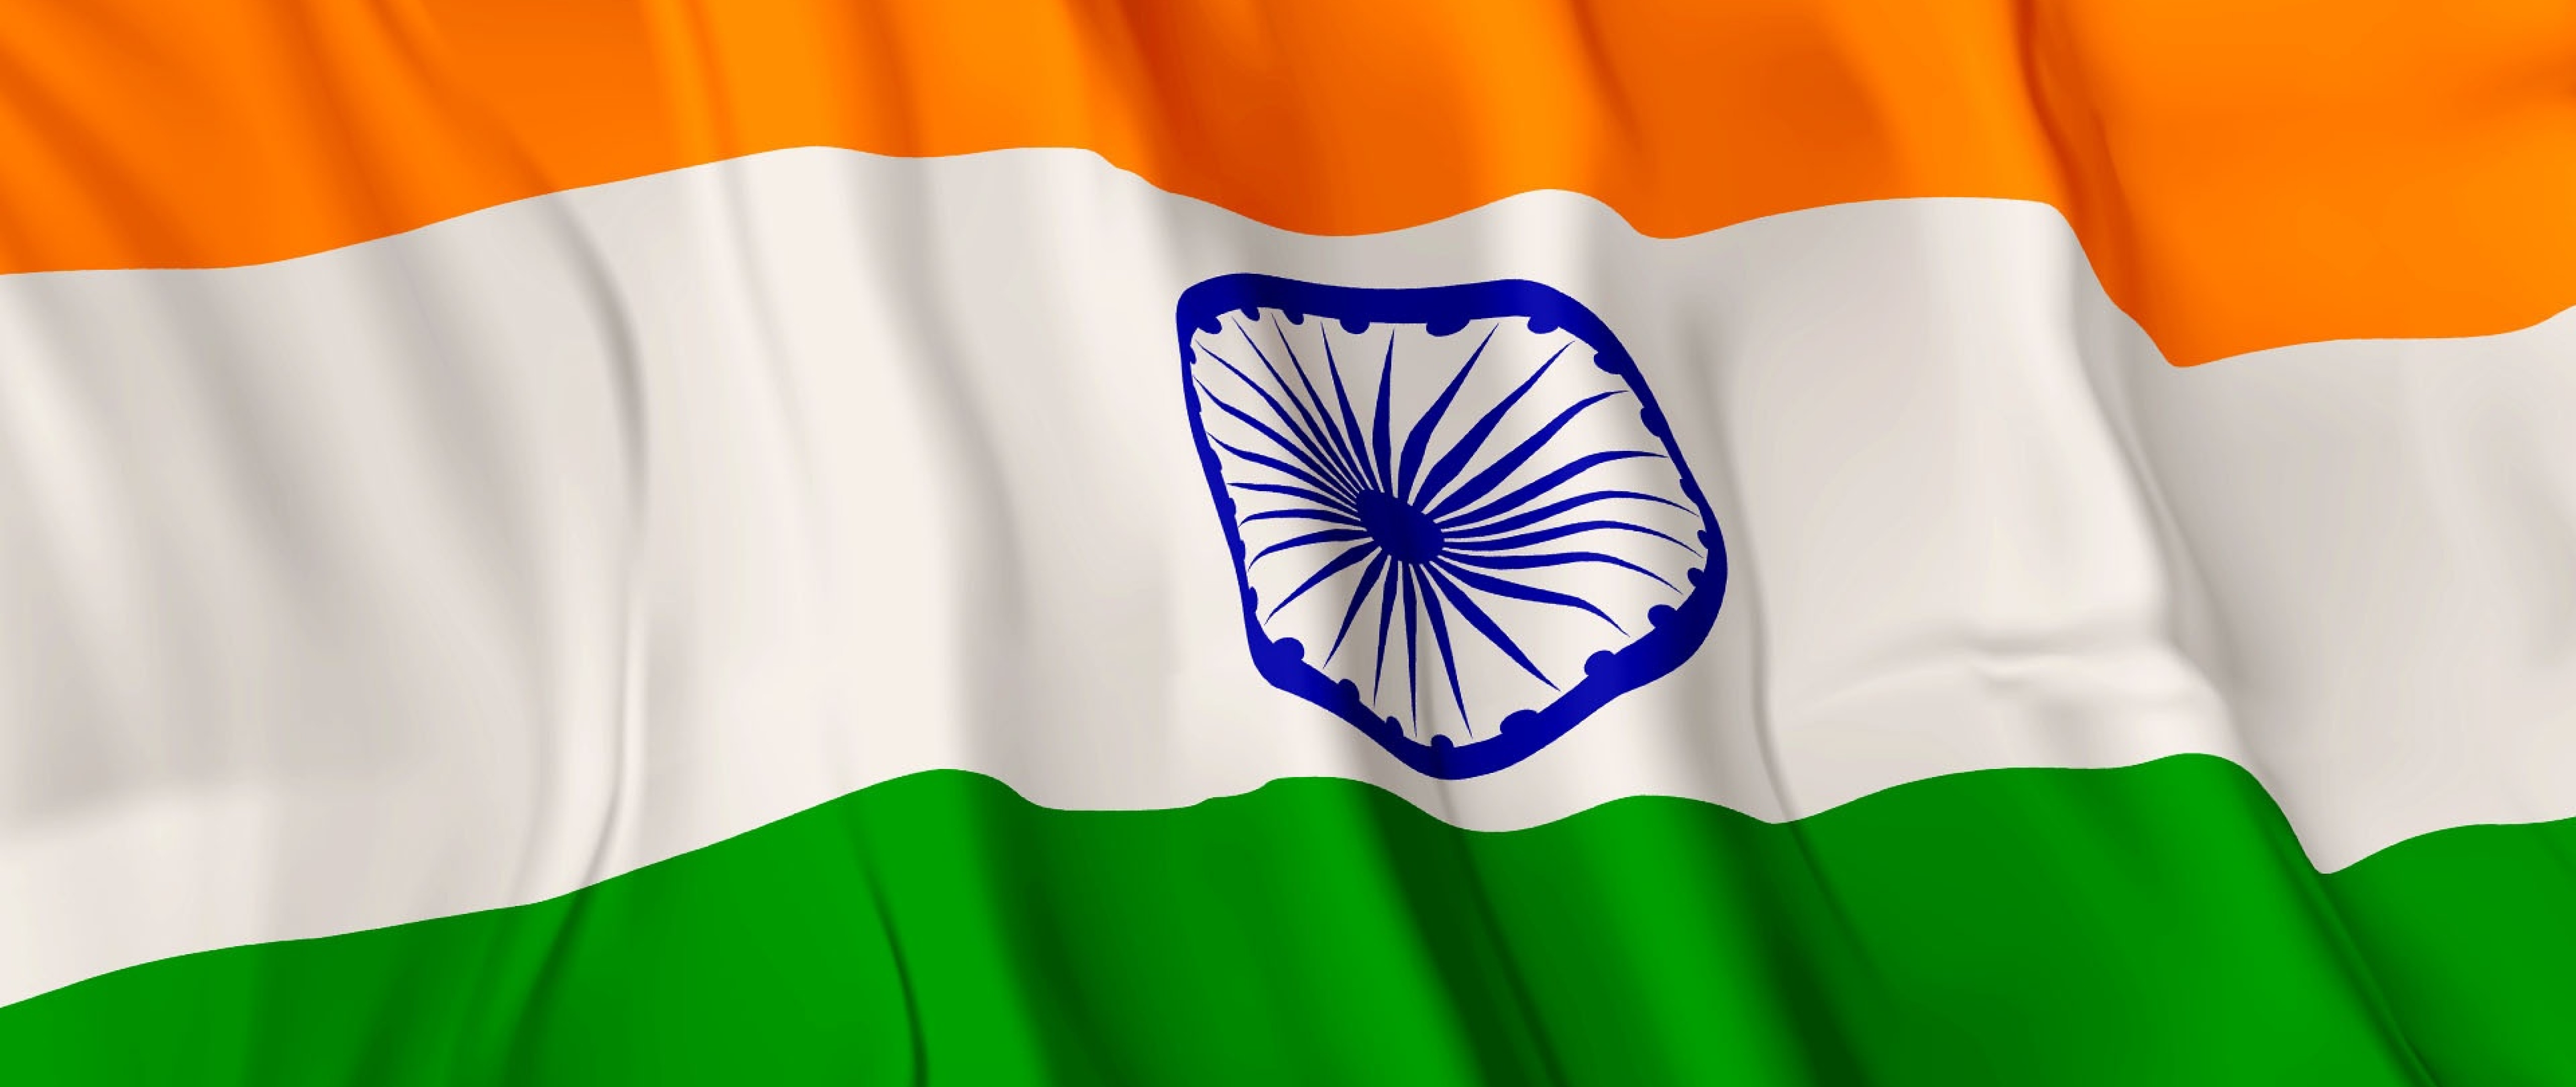 Indian Flag Hd Wallpapers Iphone - HD Wallpaper 